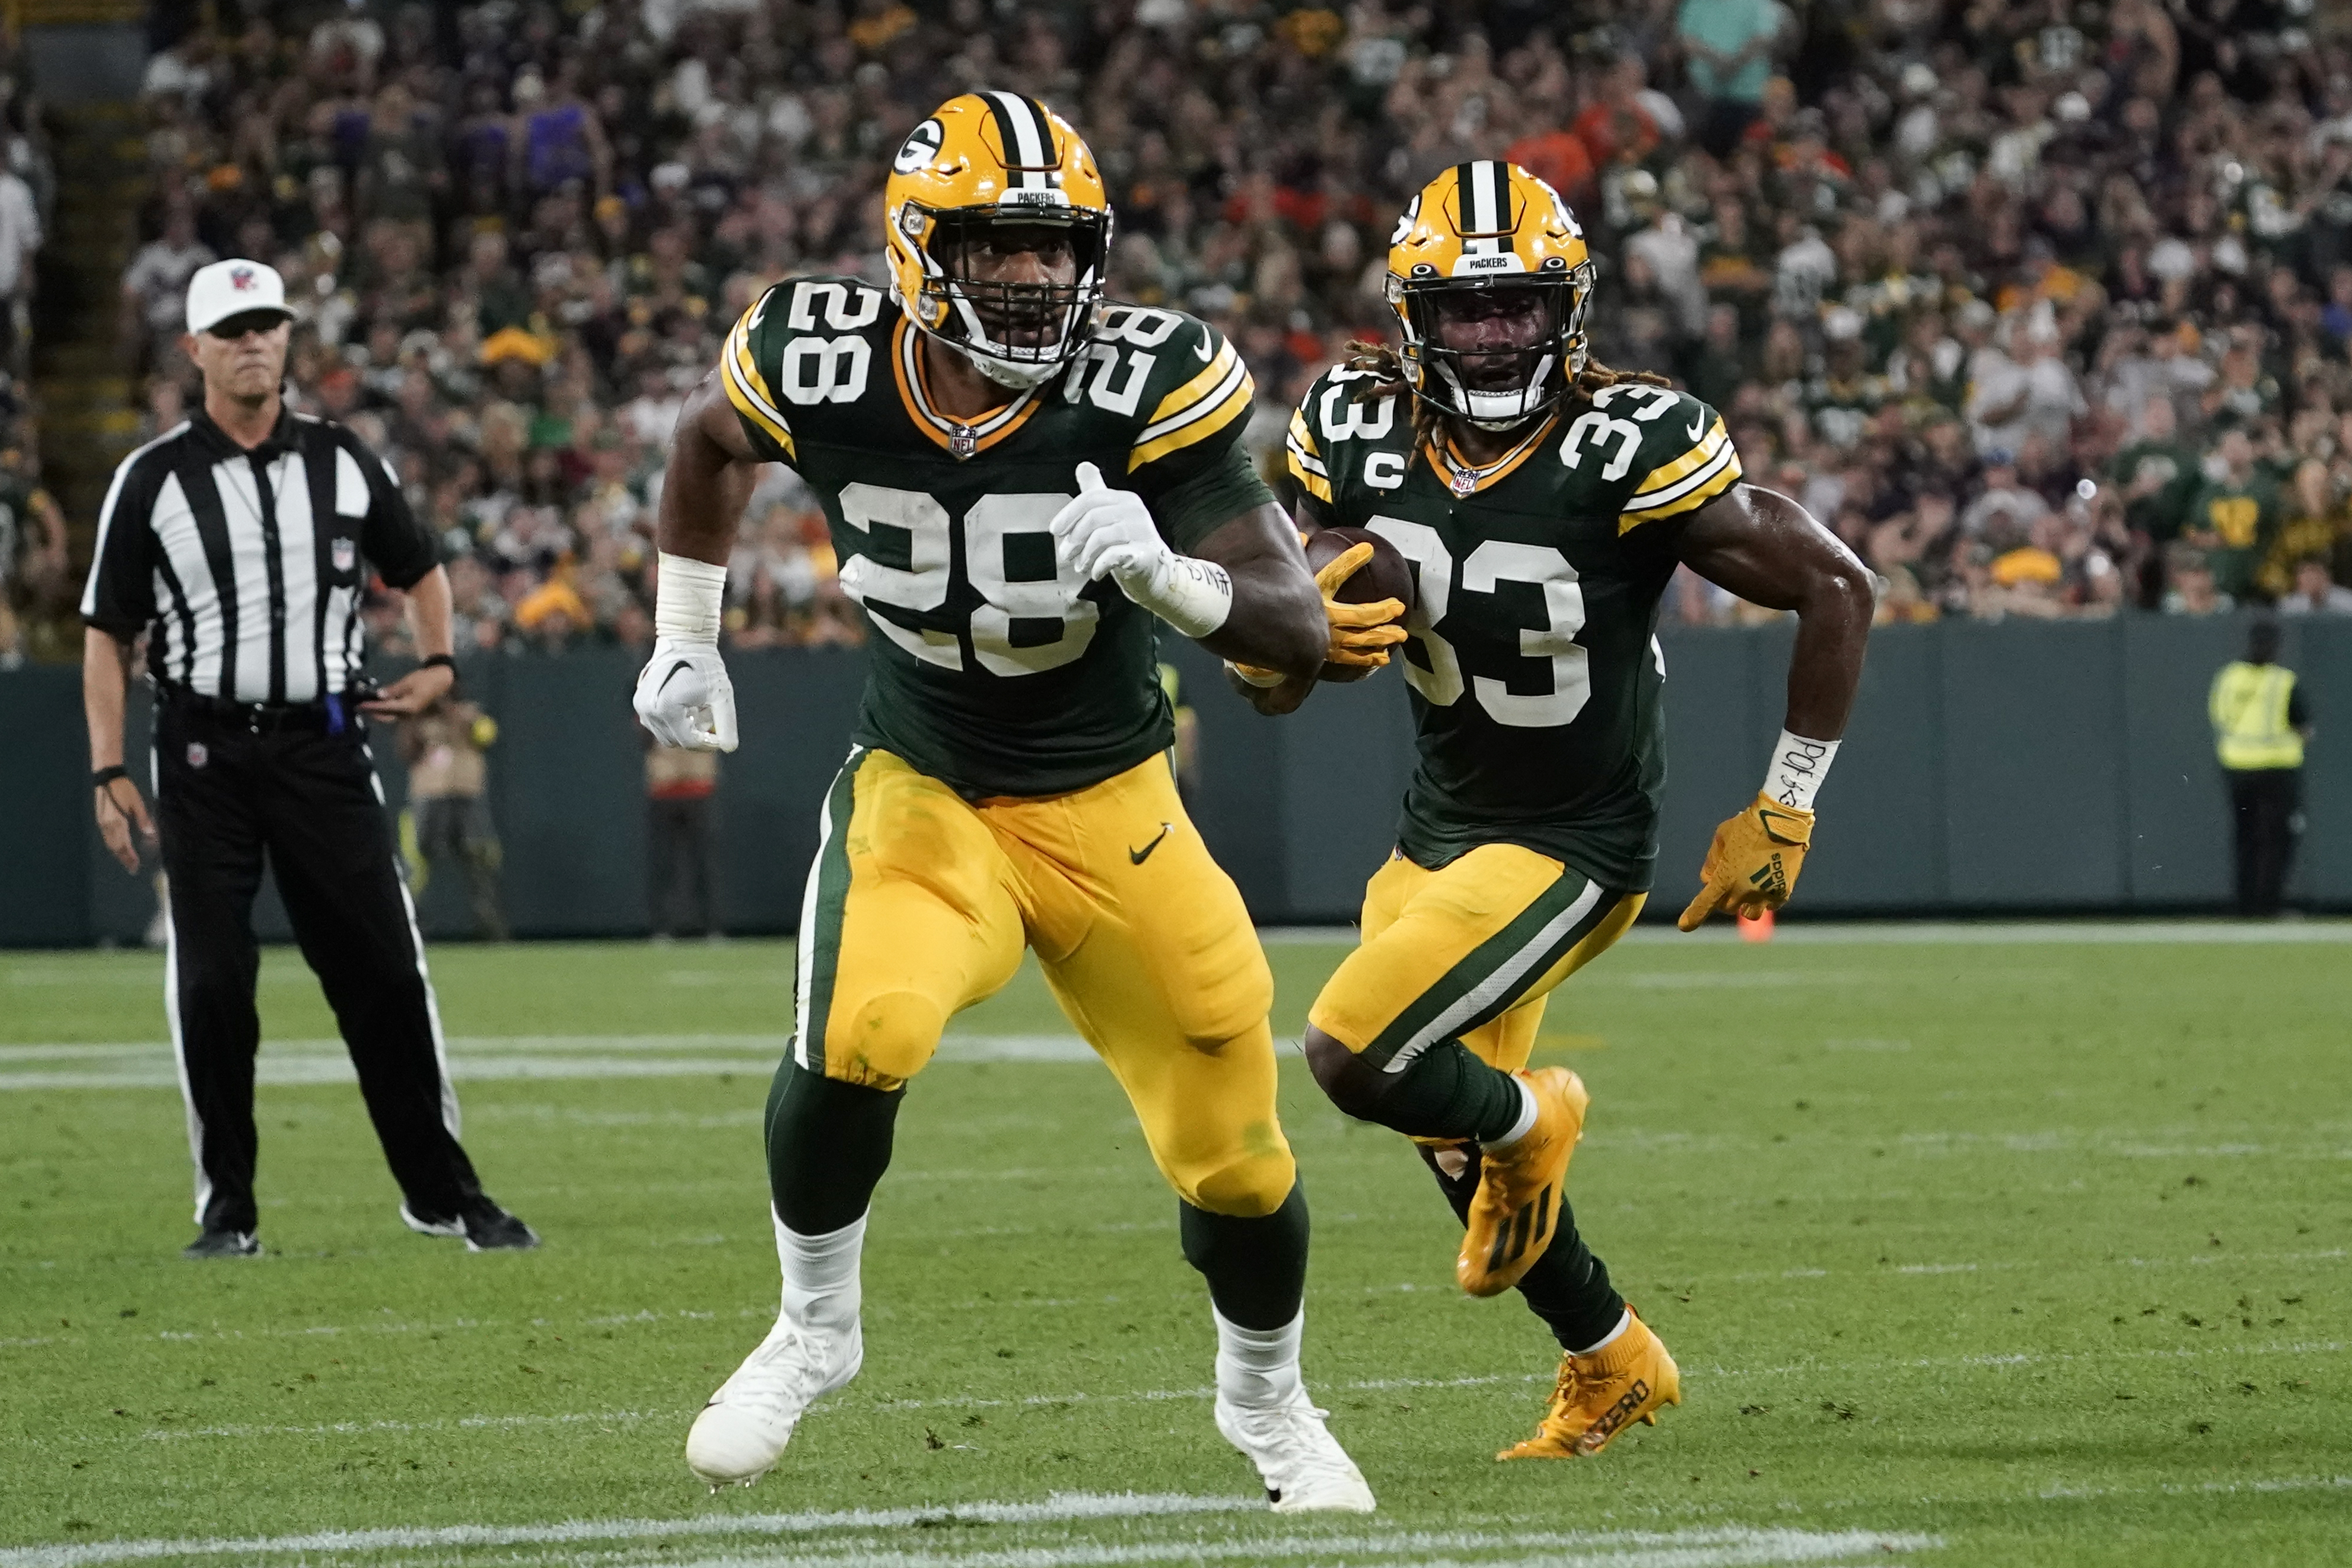 Running backs 1A and 1B lead the Packers offense